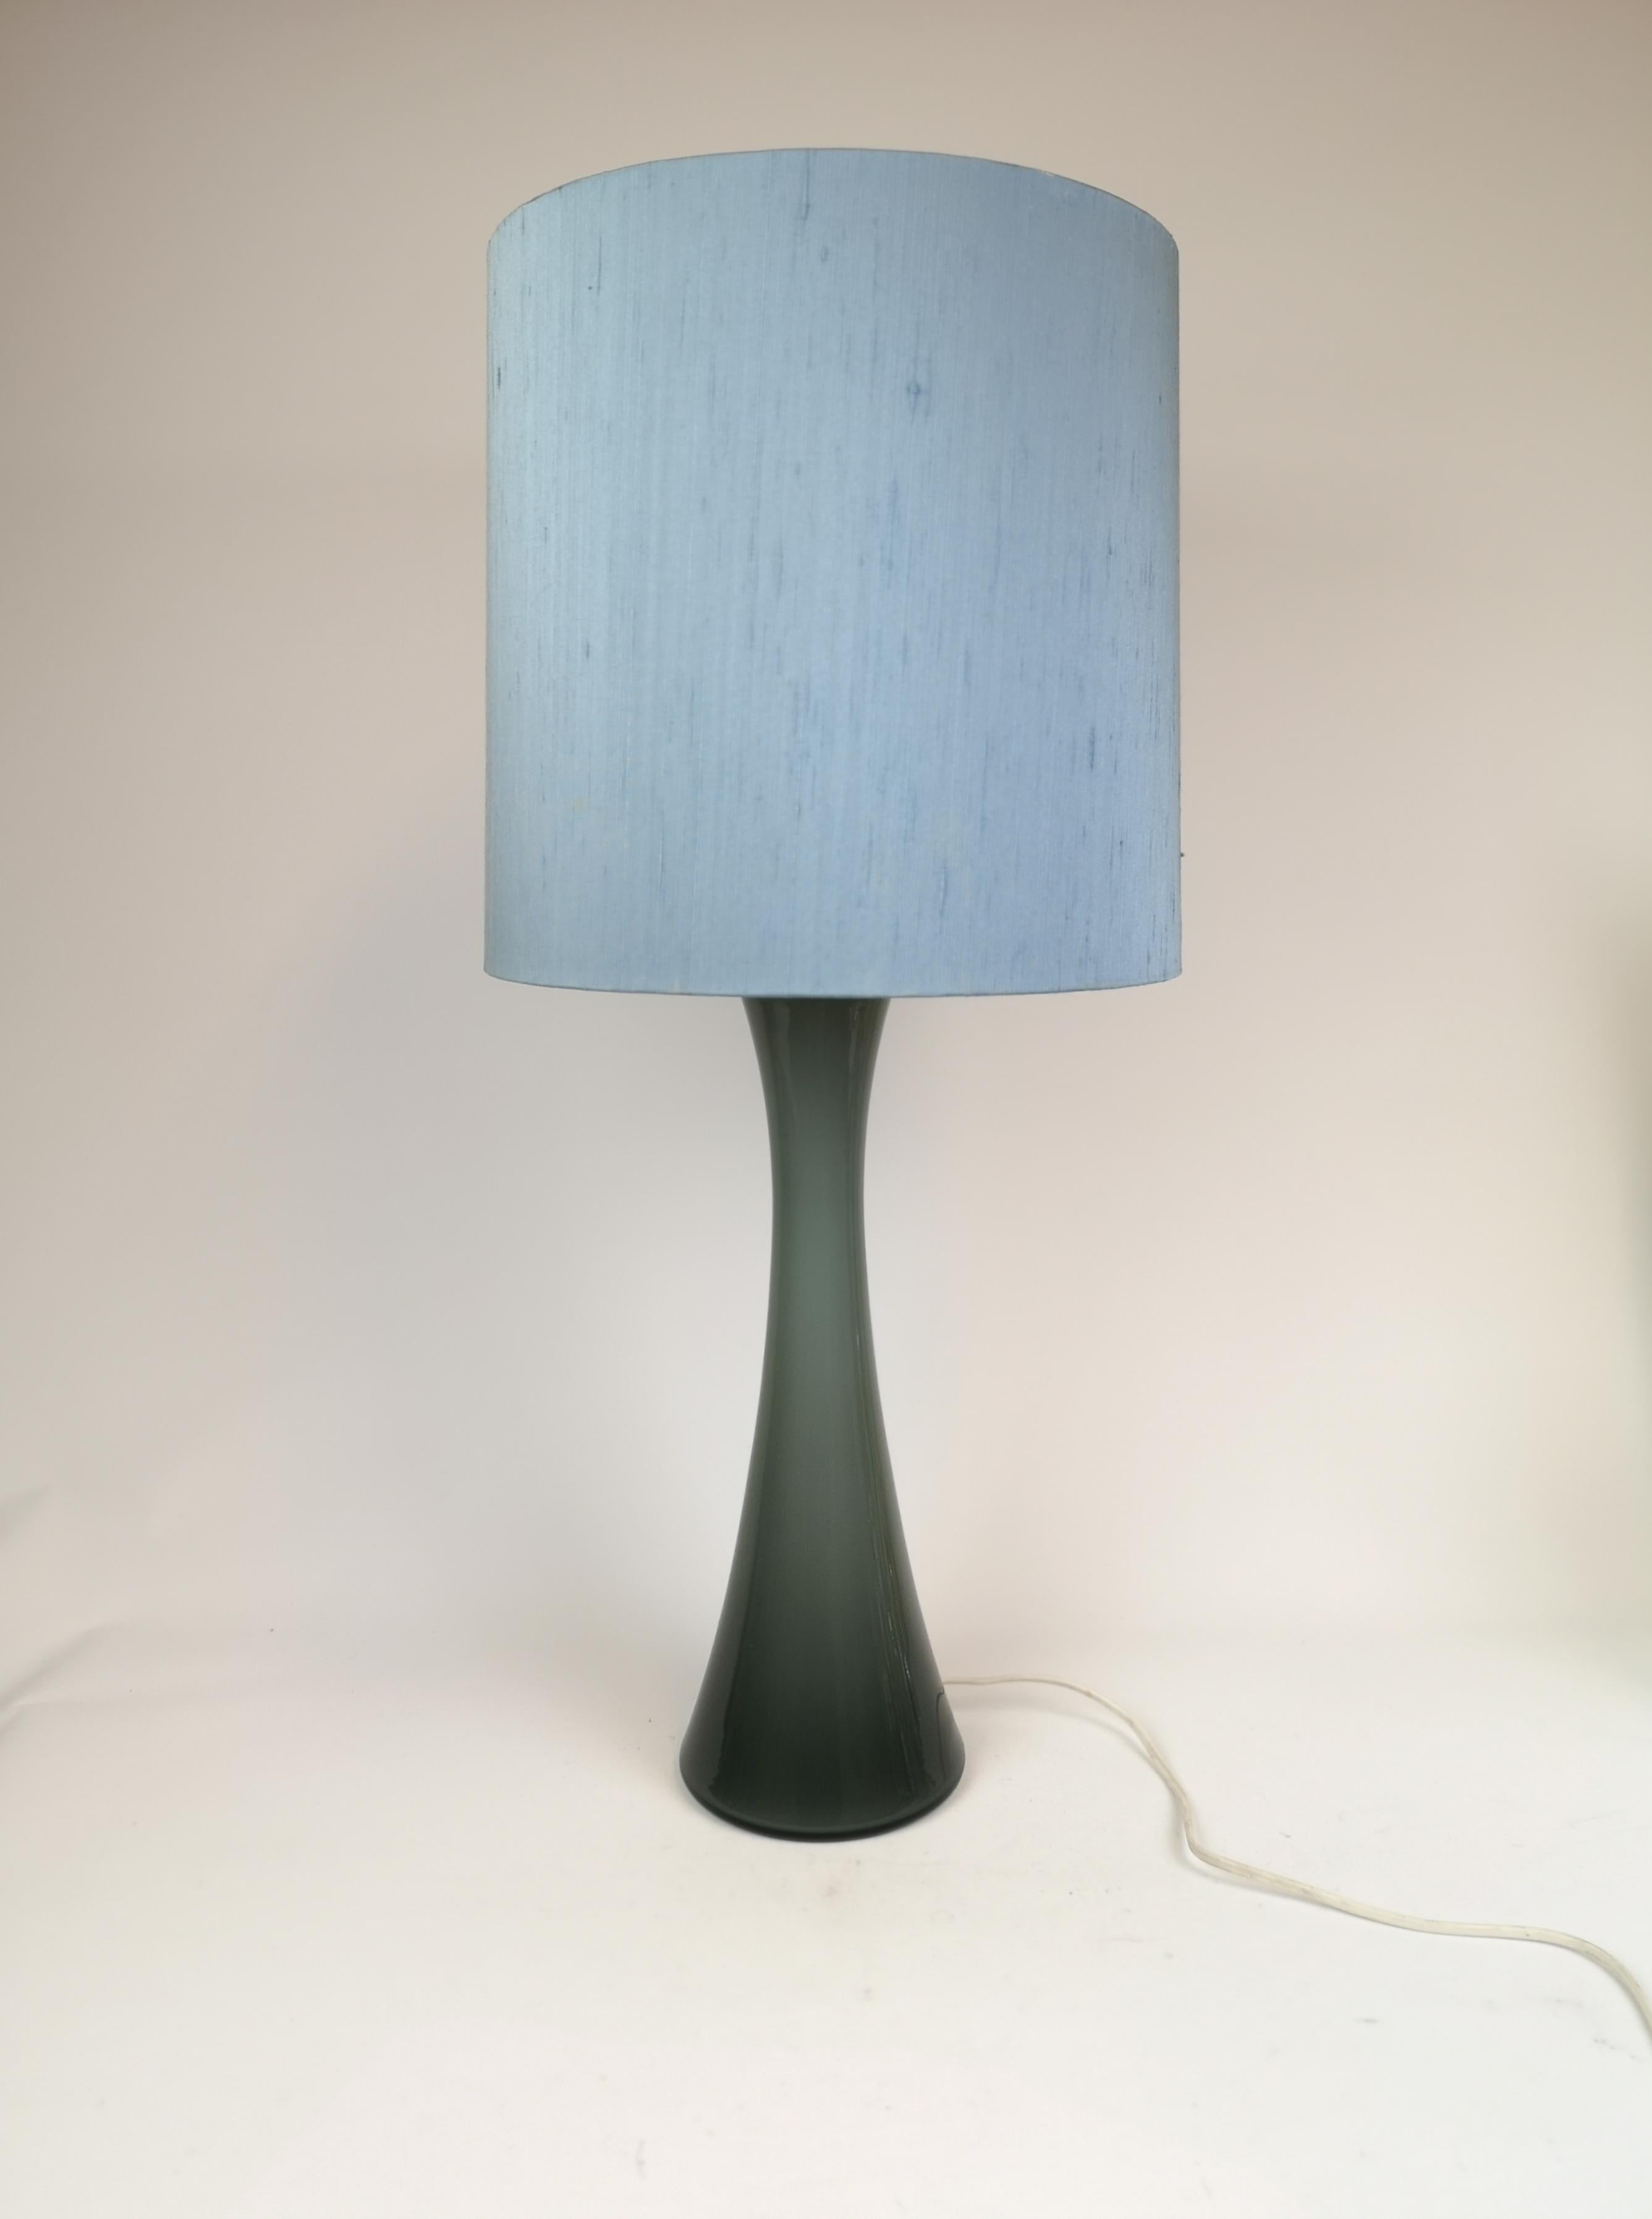 Wonderful diabolo shaped Swedish opaline blue /grey glass table lamp with teak fittings. Designed by Berndt Nordstedt for Bergboms. 

Good working vintage condition. 

Measures: H 40 / 60 cm, D 14 cm.